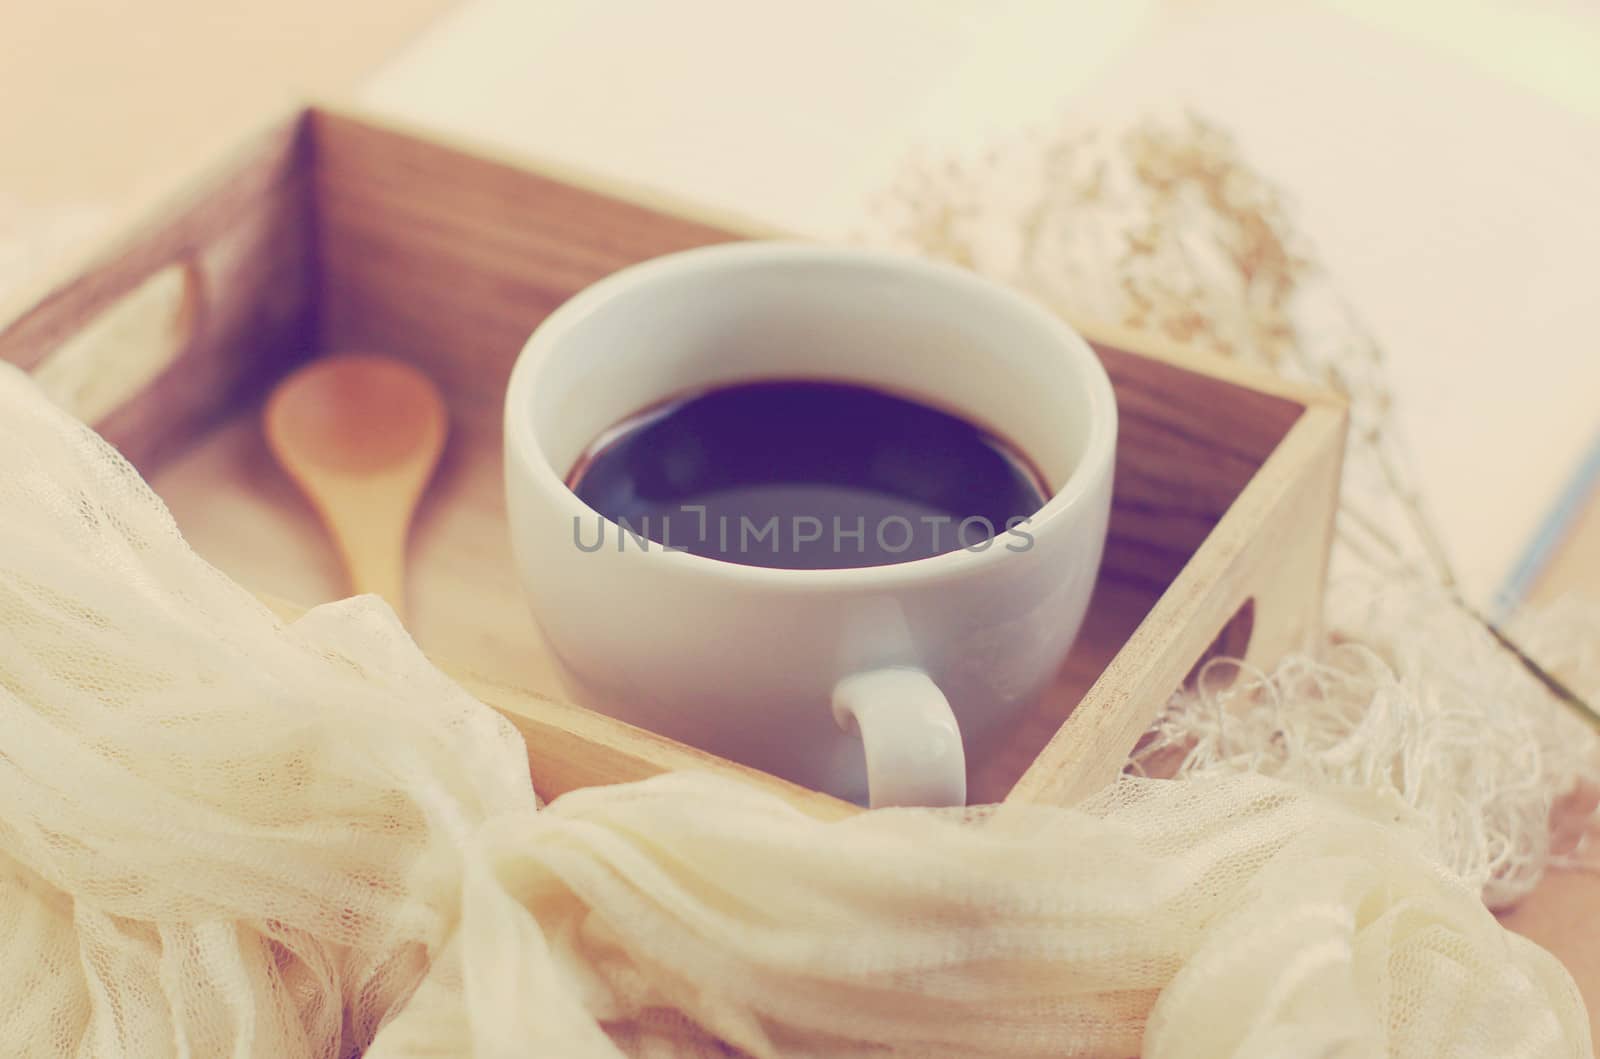 Black coffee and spoon on wooden tray, retro filter effect by nuchylee